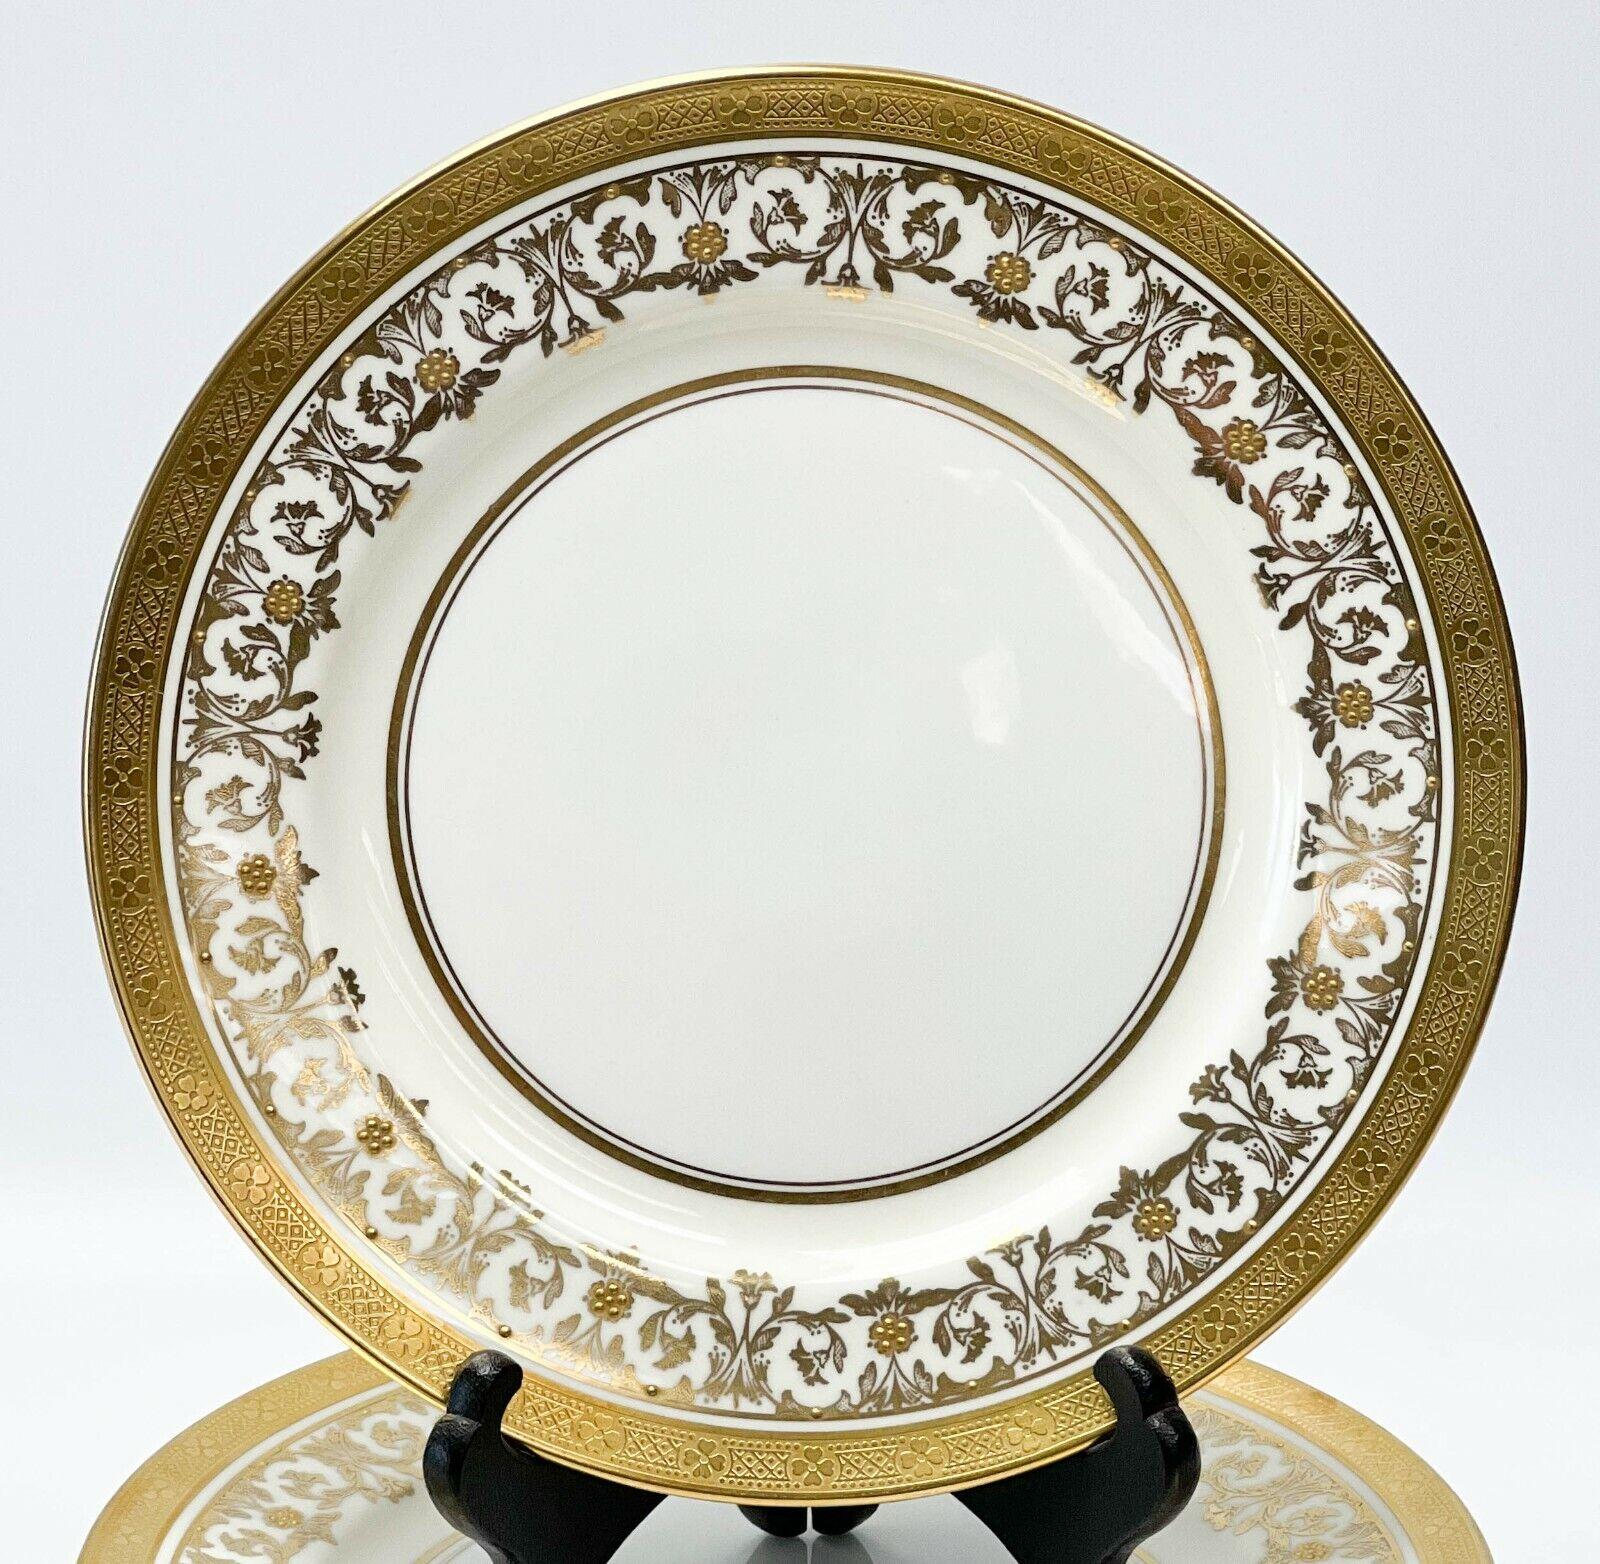 12 Aynsley England Porcelain dessert plates in Kenilworth ivory, circa 1940

A white center with an off-white ground to the edge with ornate gilt foliate decoration with raised gold floral accents. A geometric floral pattern to the gilt rims.